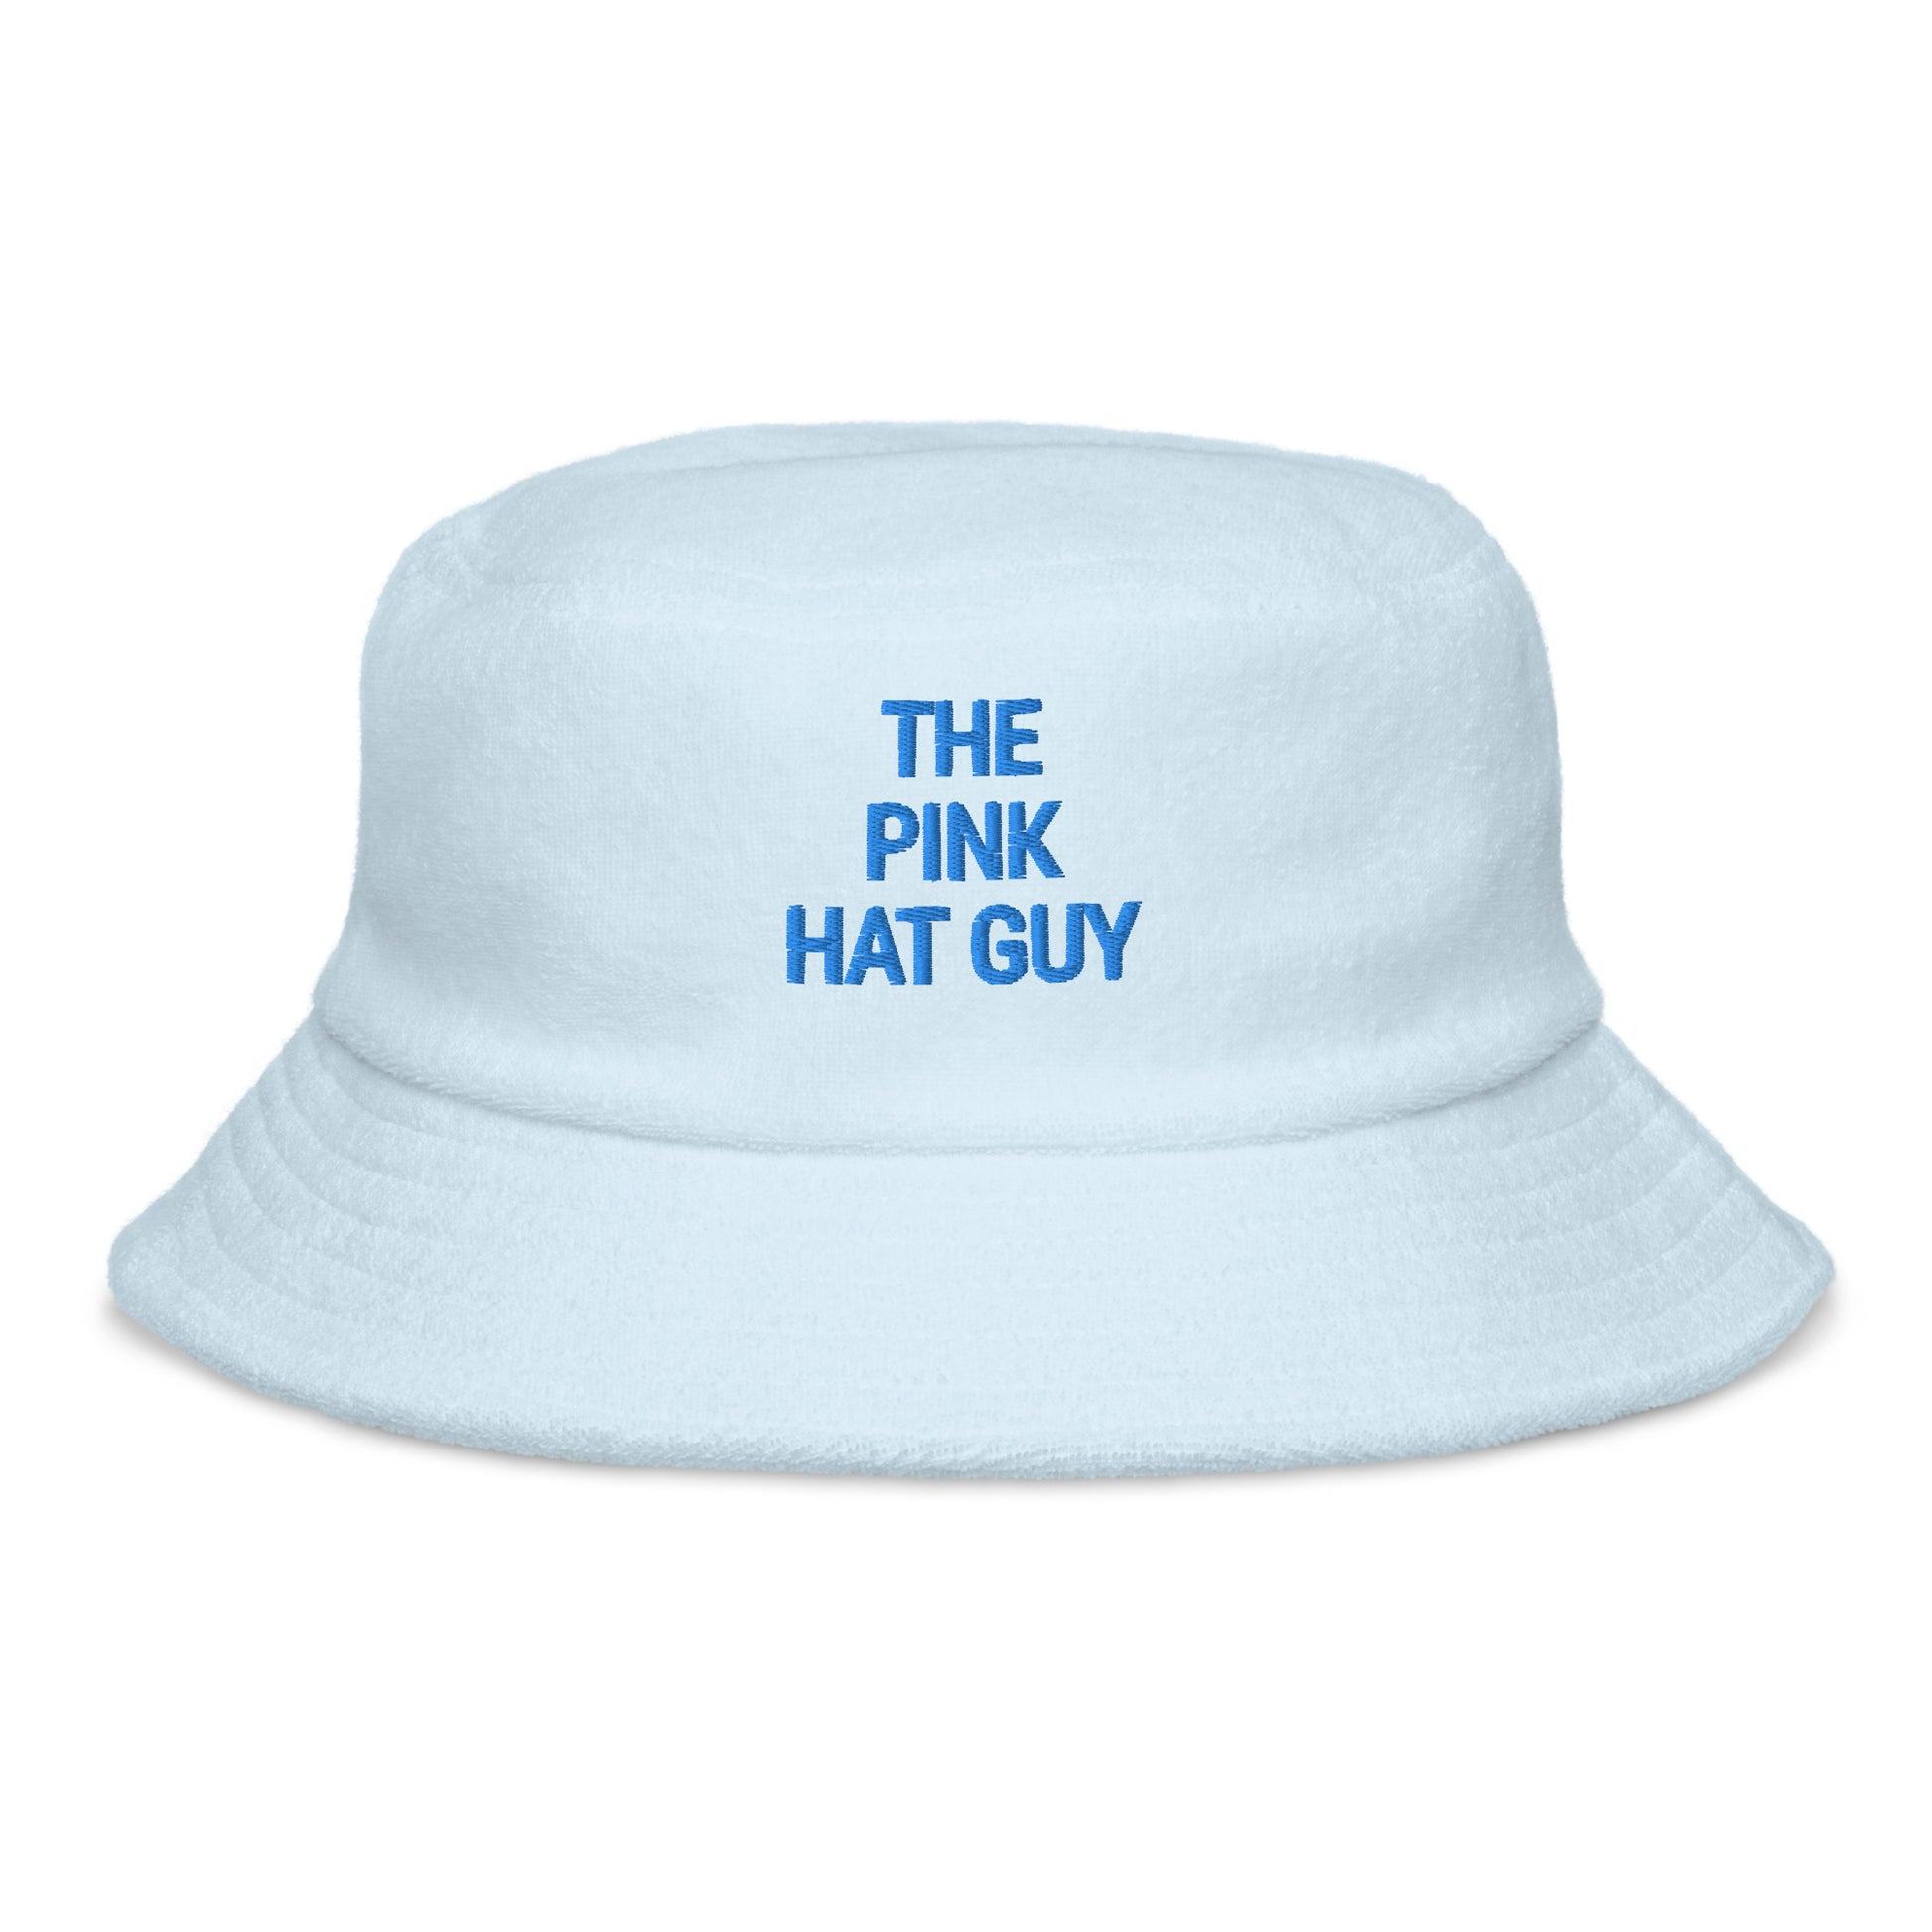 The Pink Hat Guy / The Pink Hat Guy Terry cloth bucket hat